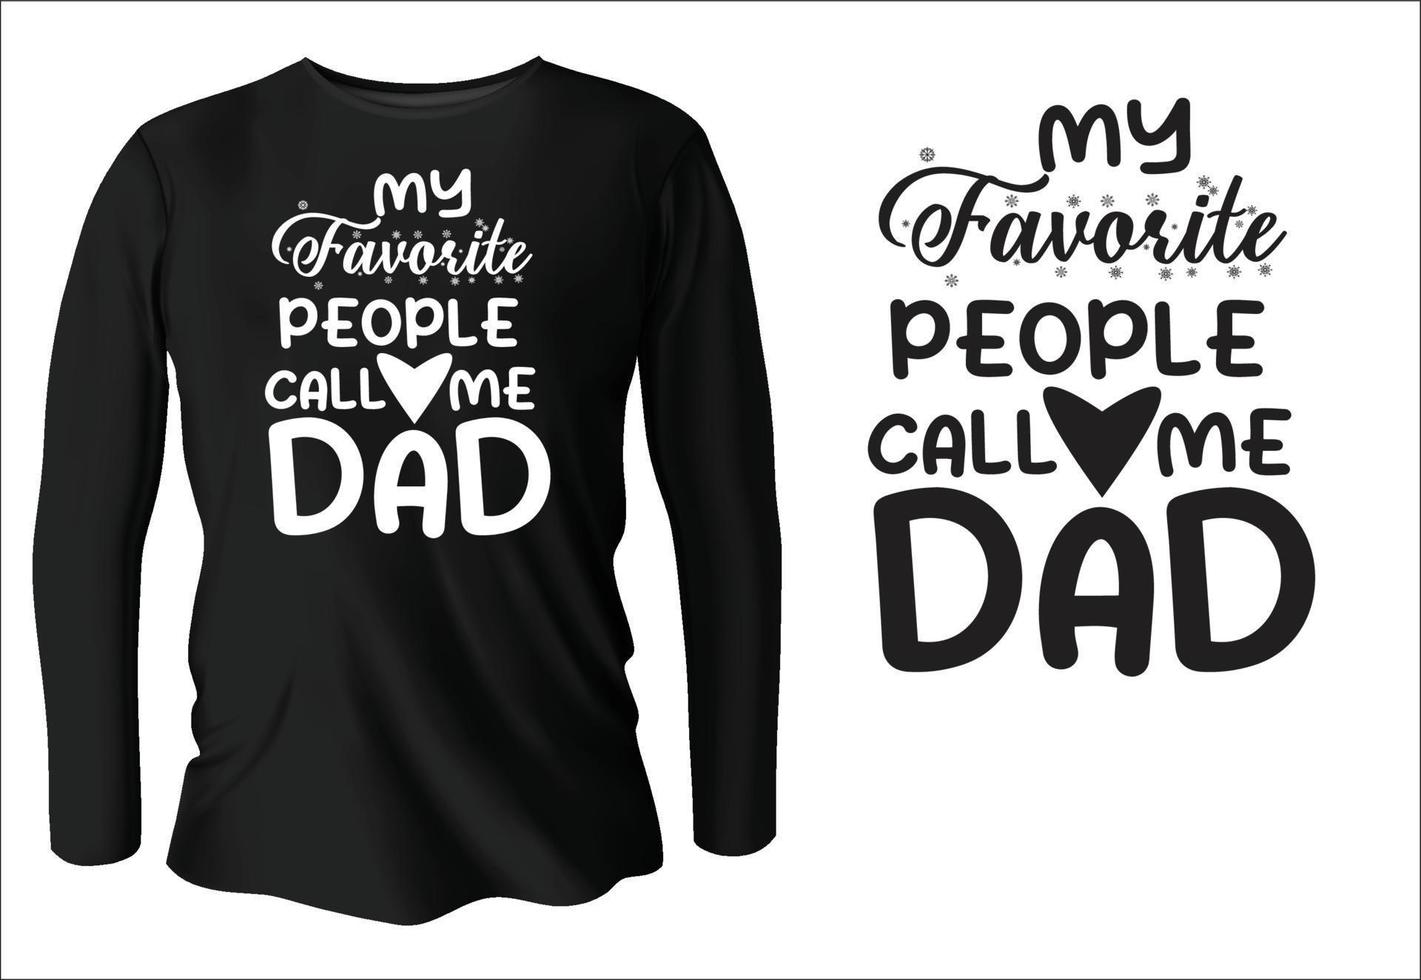 My favorite people call me dad t-shirt with vector